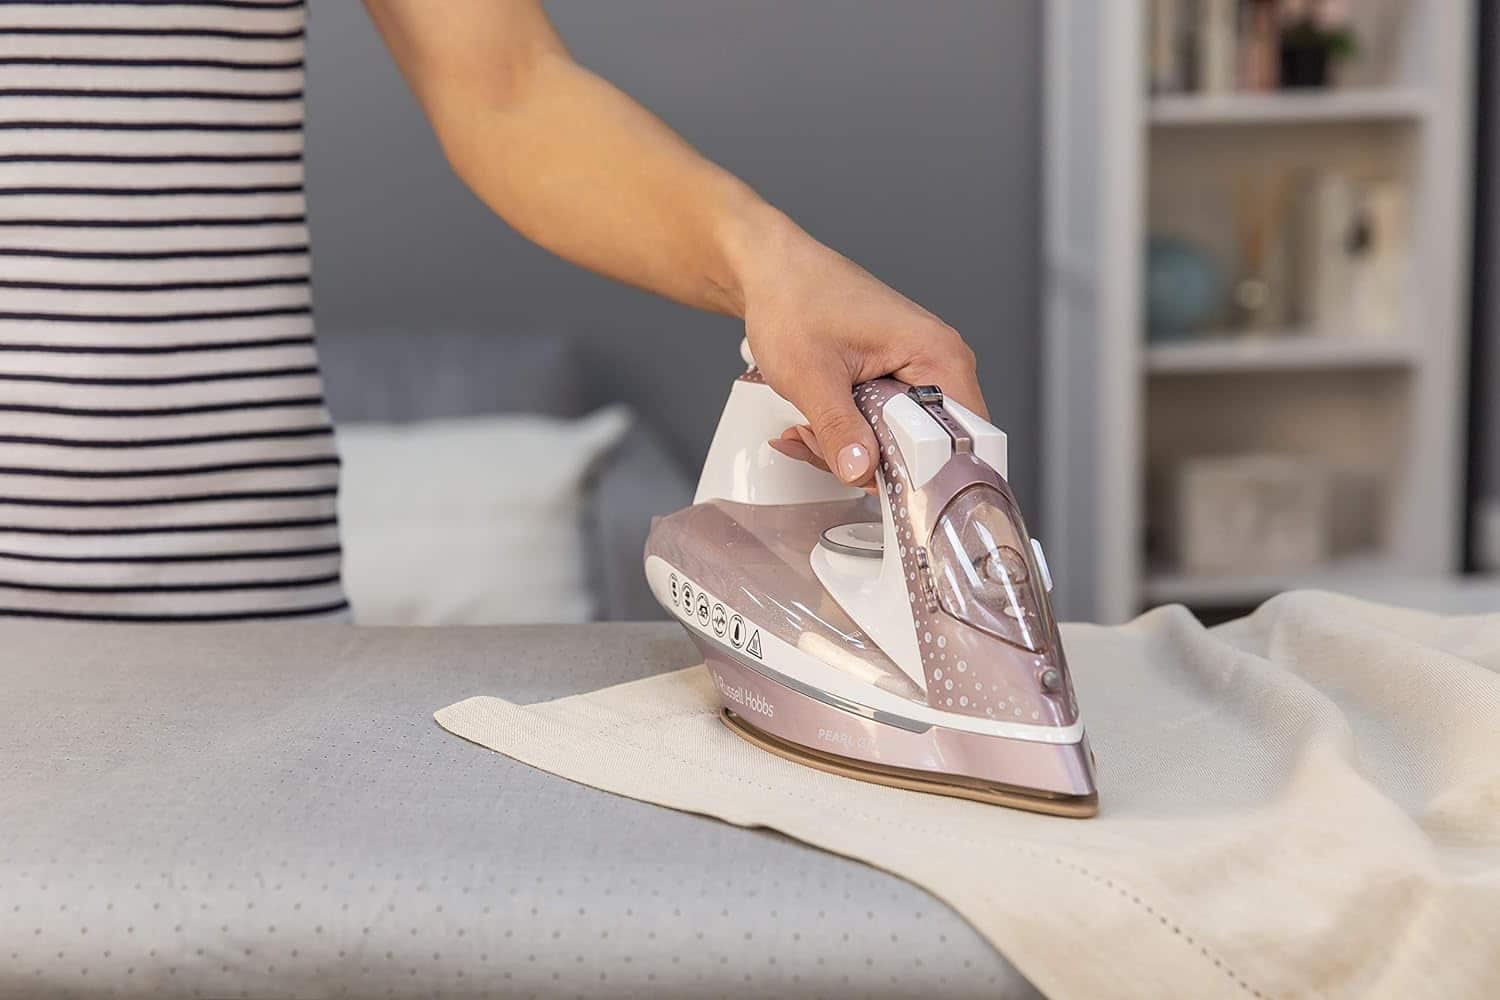 Russell Hobbs 23972 Pearl Glide Steam Iron with Pearl 0131